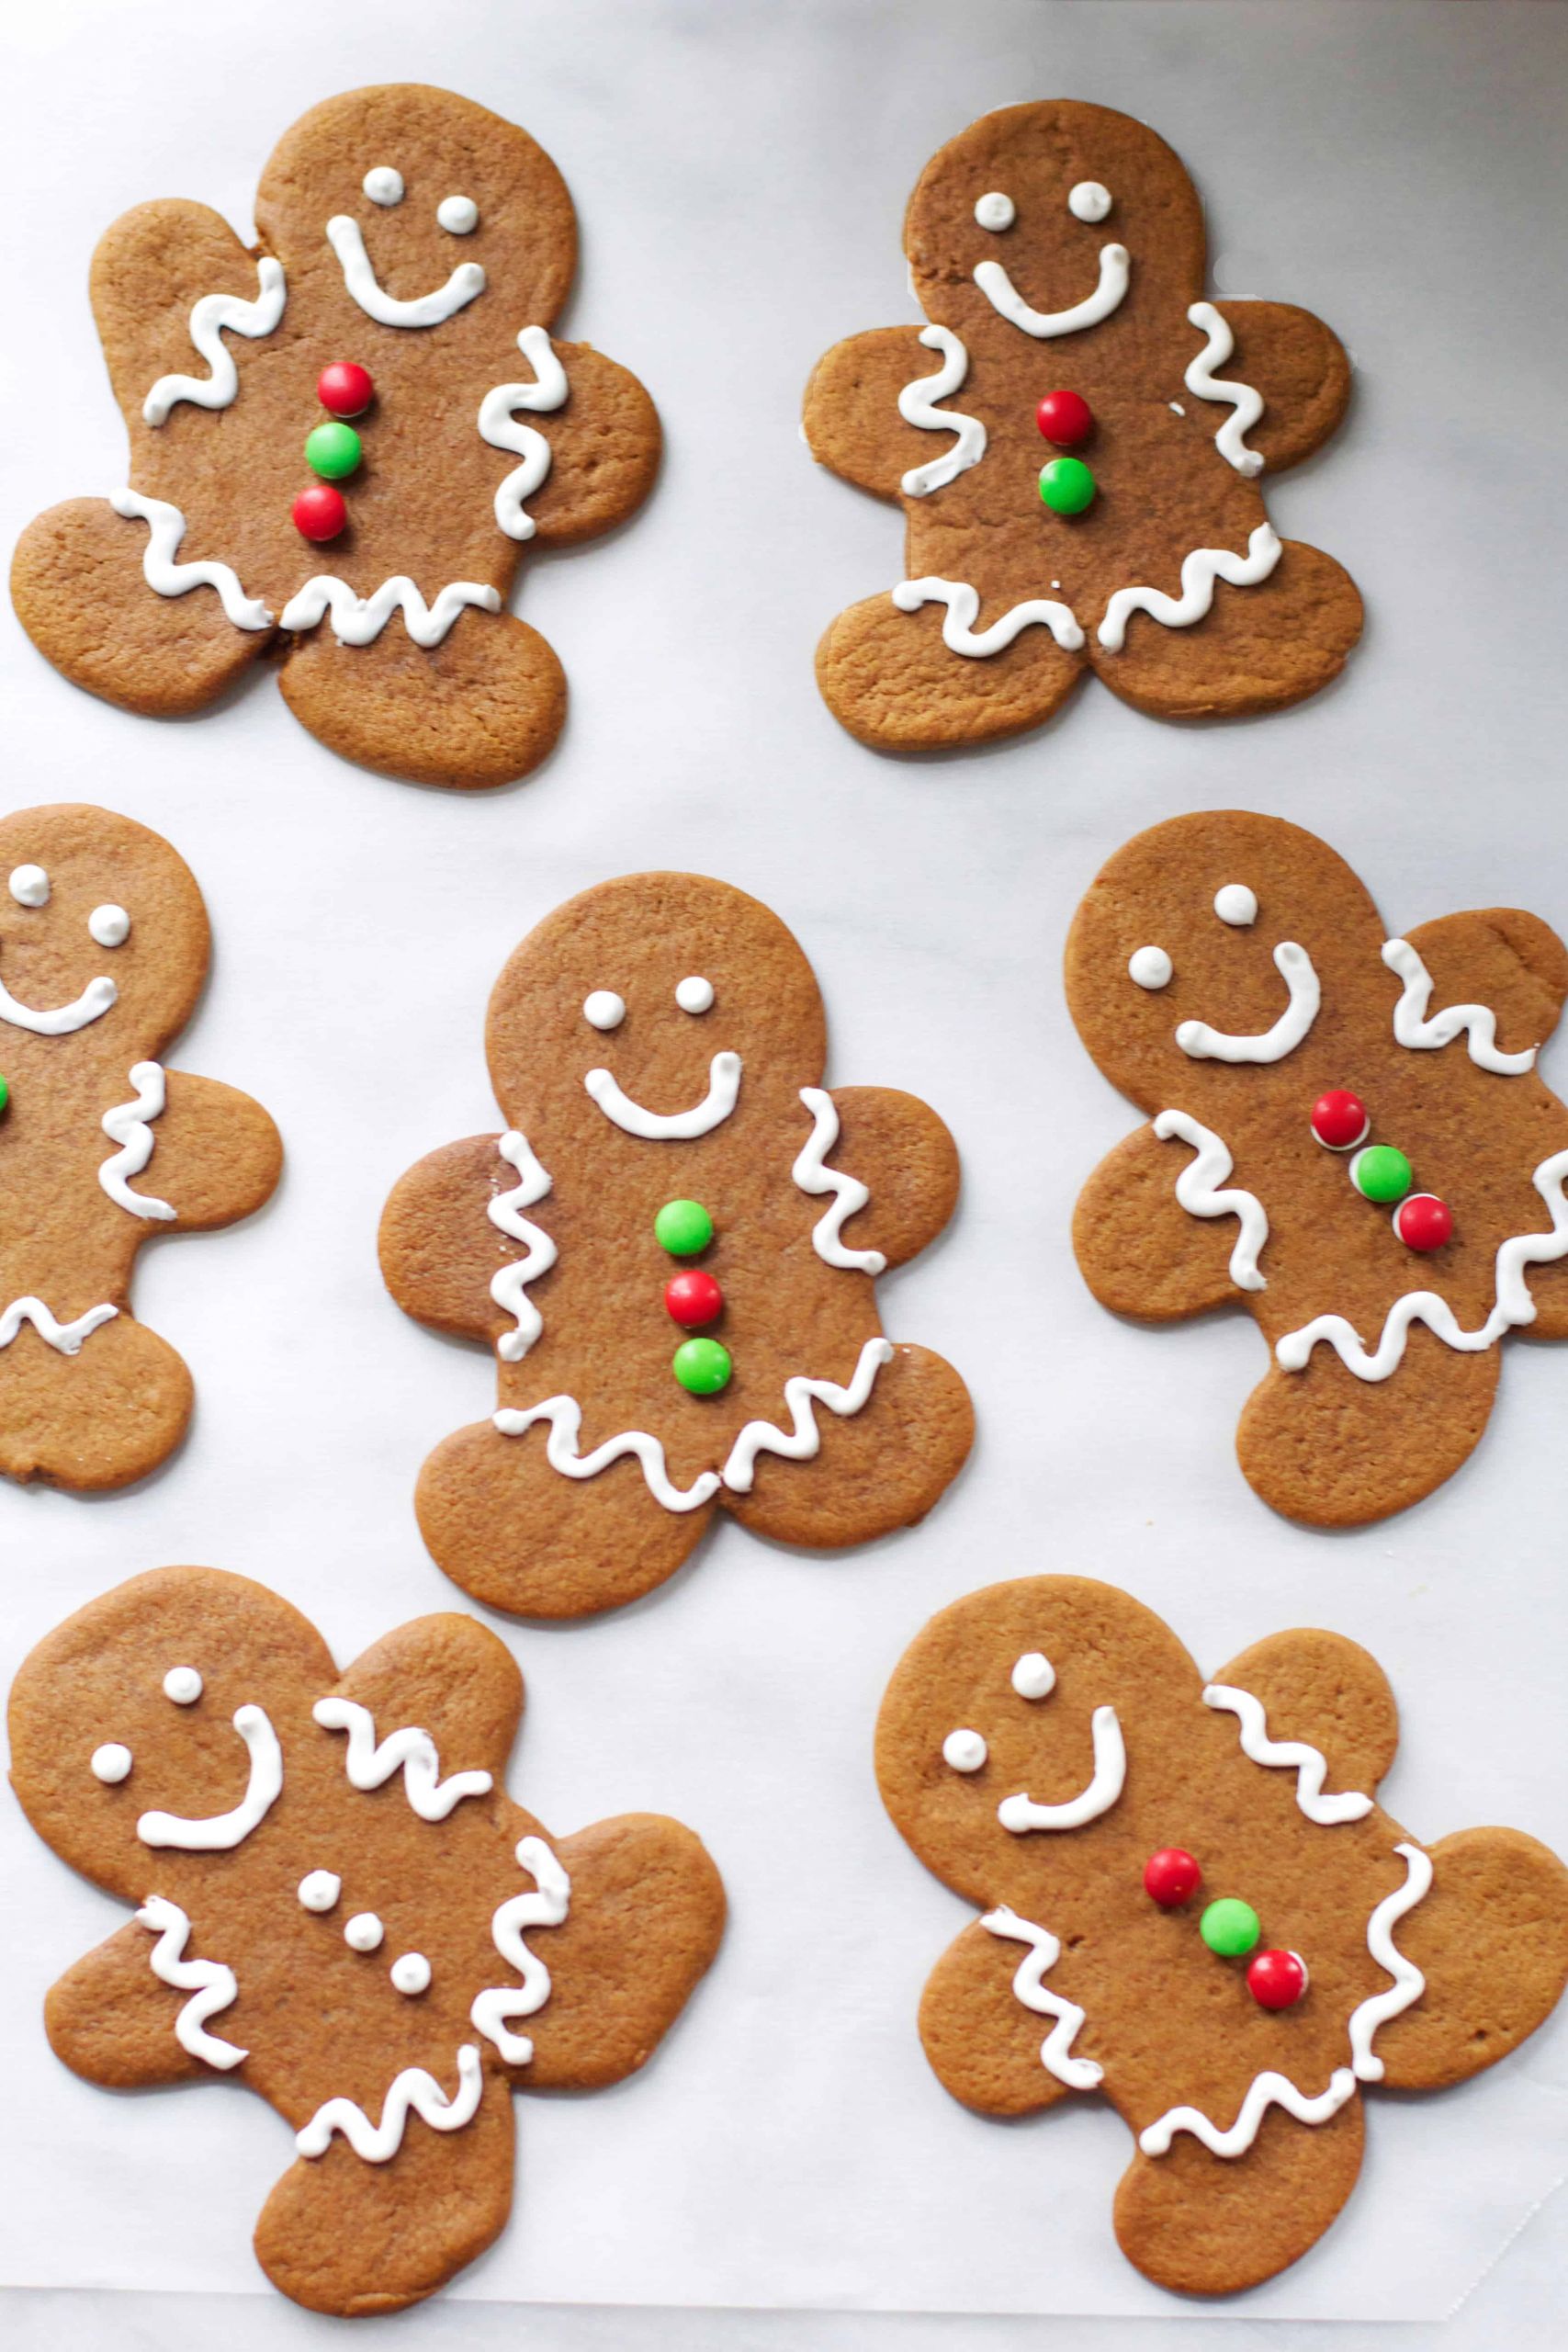 Soft Gingerbread Man Cookies Recipe
 Soft and Chewy Gingerbread Men